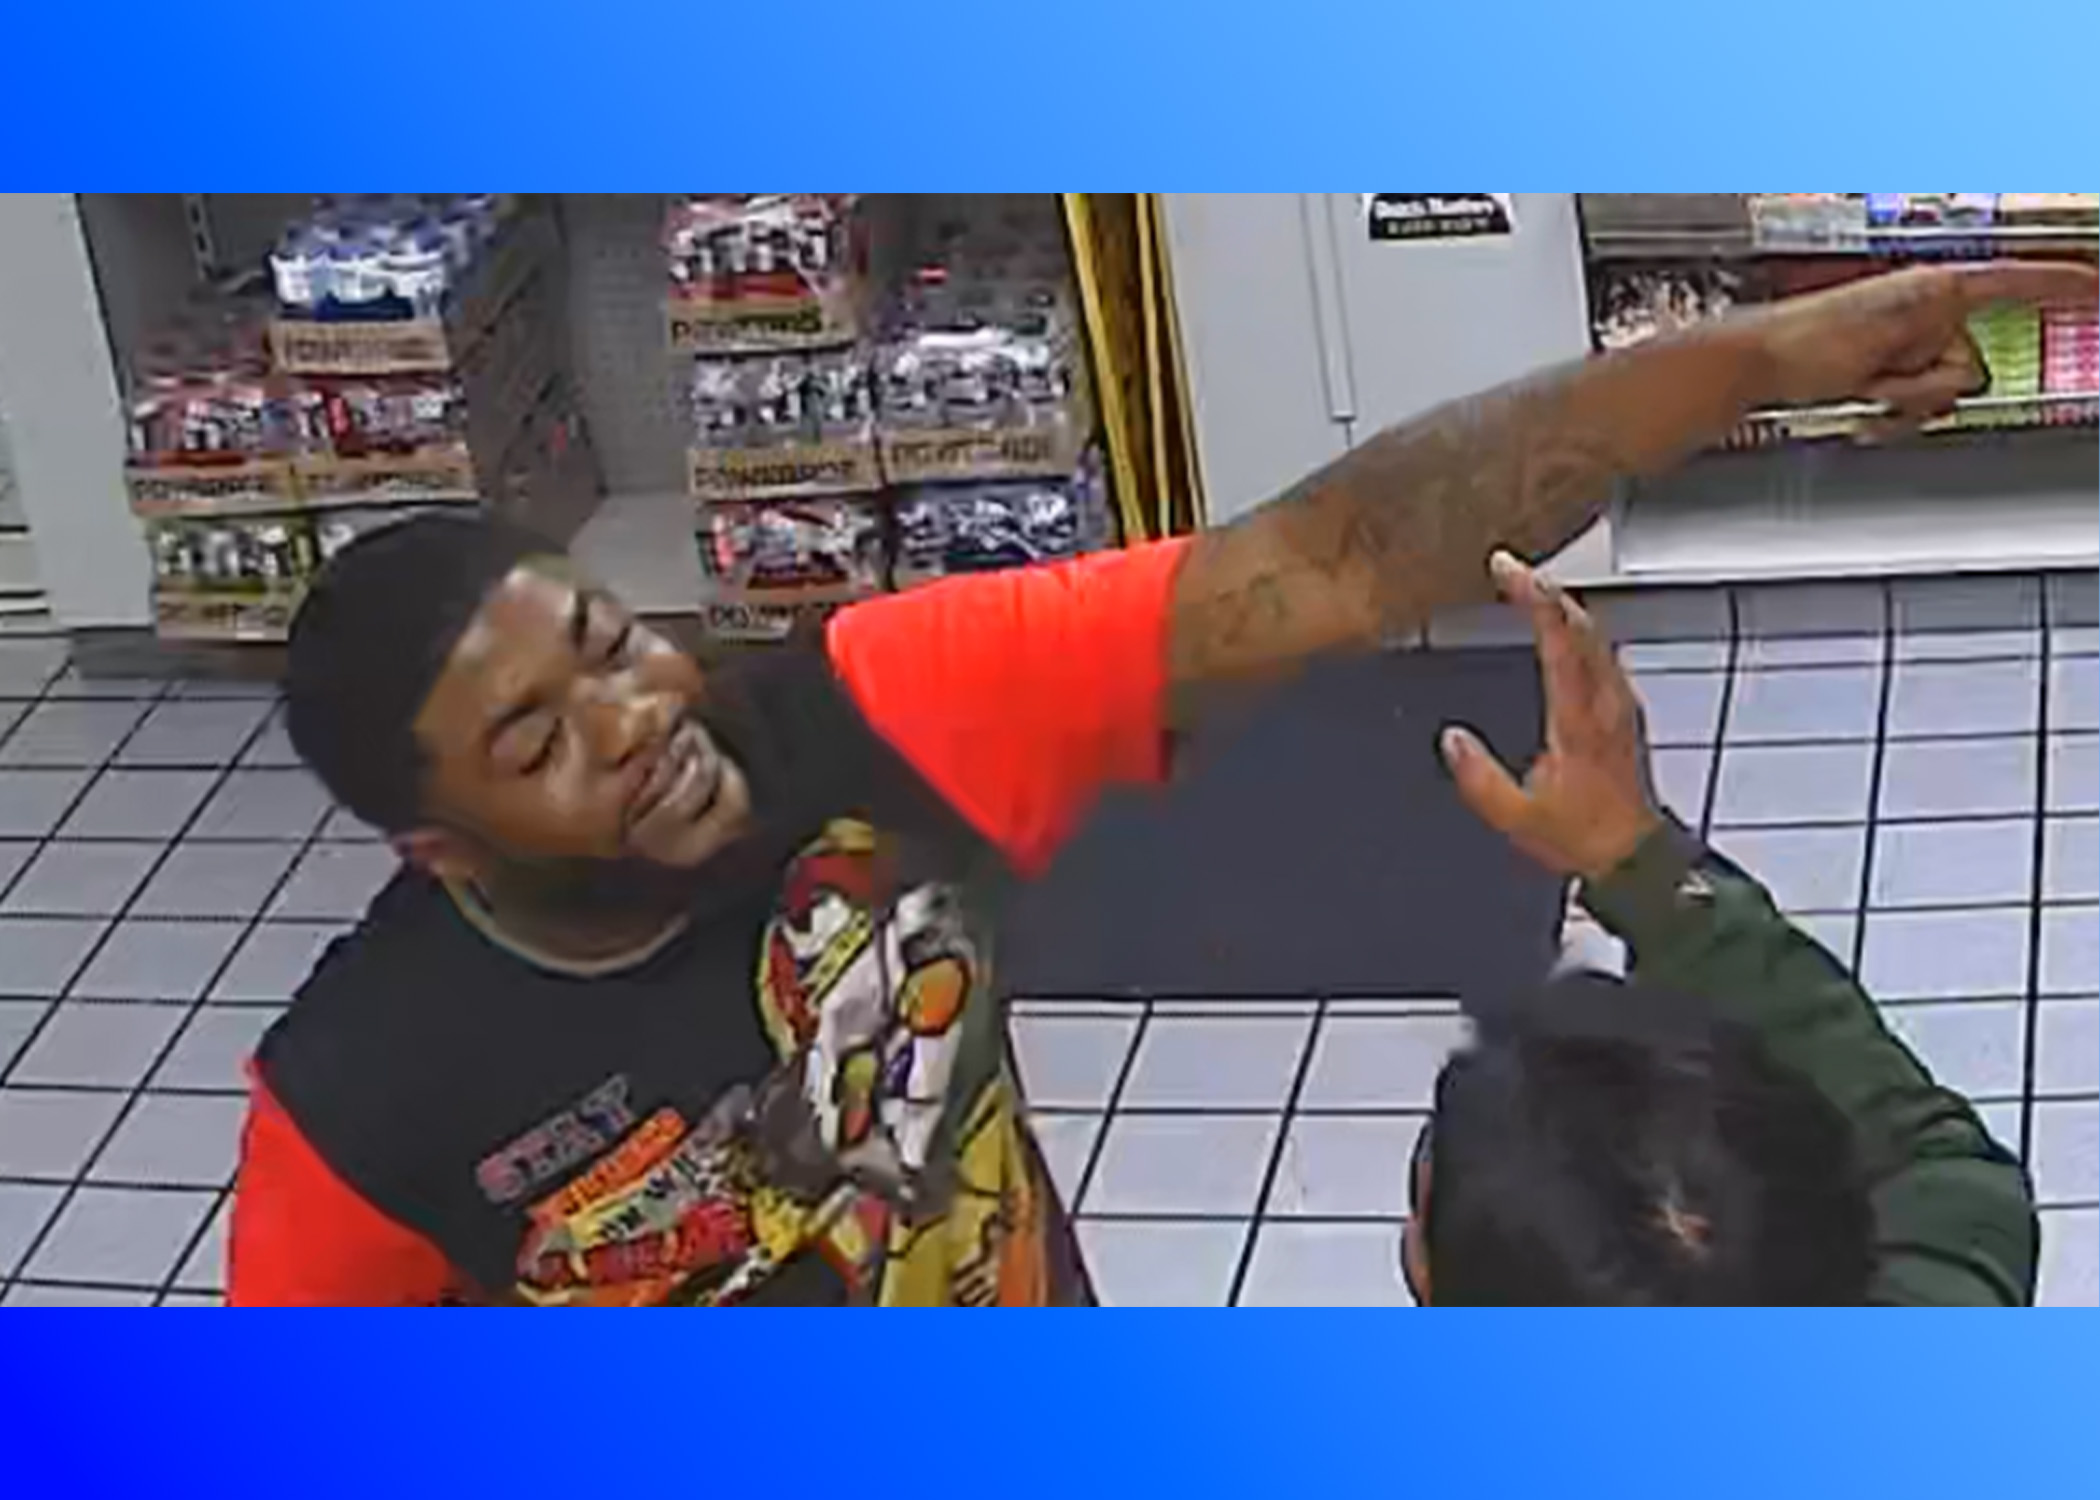 Robbery suspect's identity sought by Birmingham PD